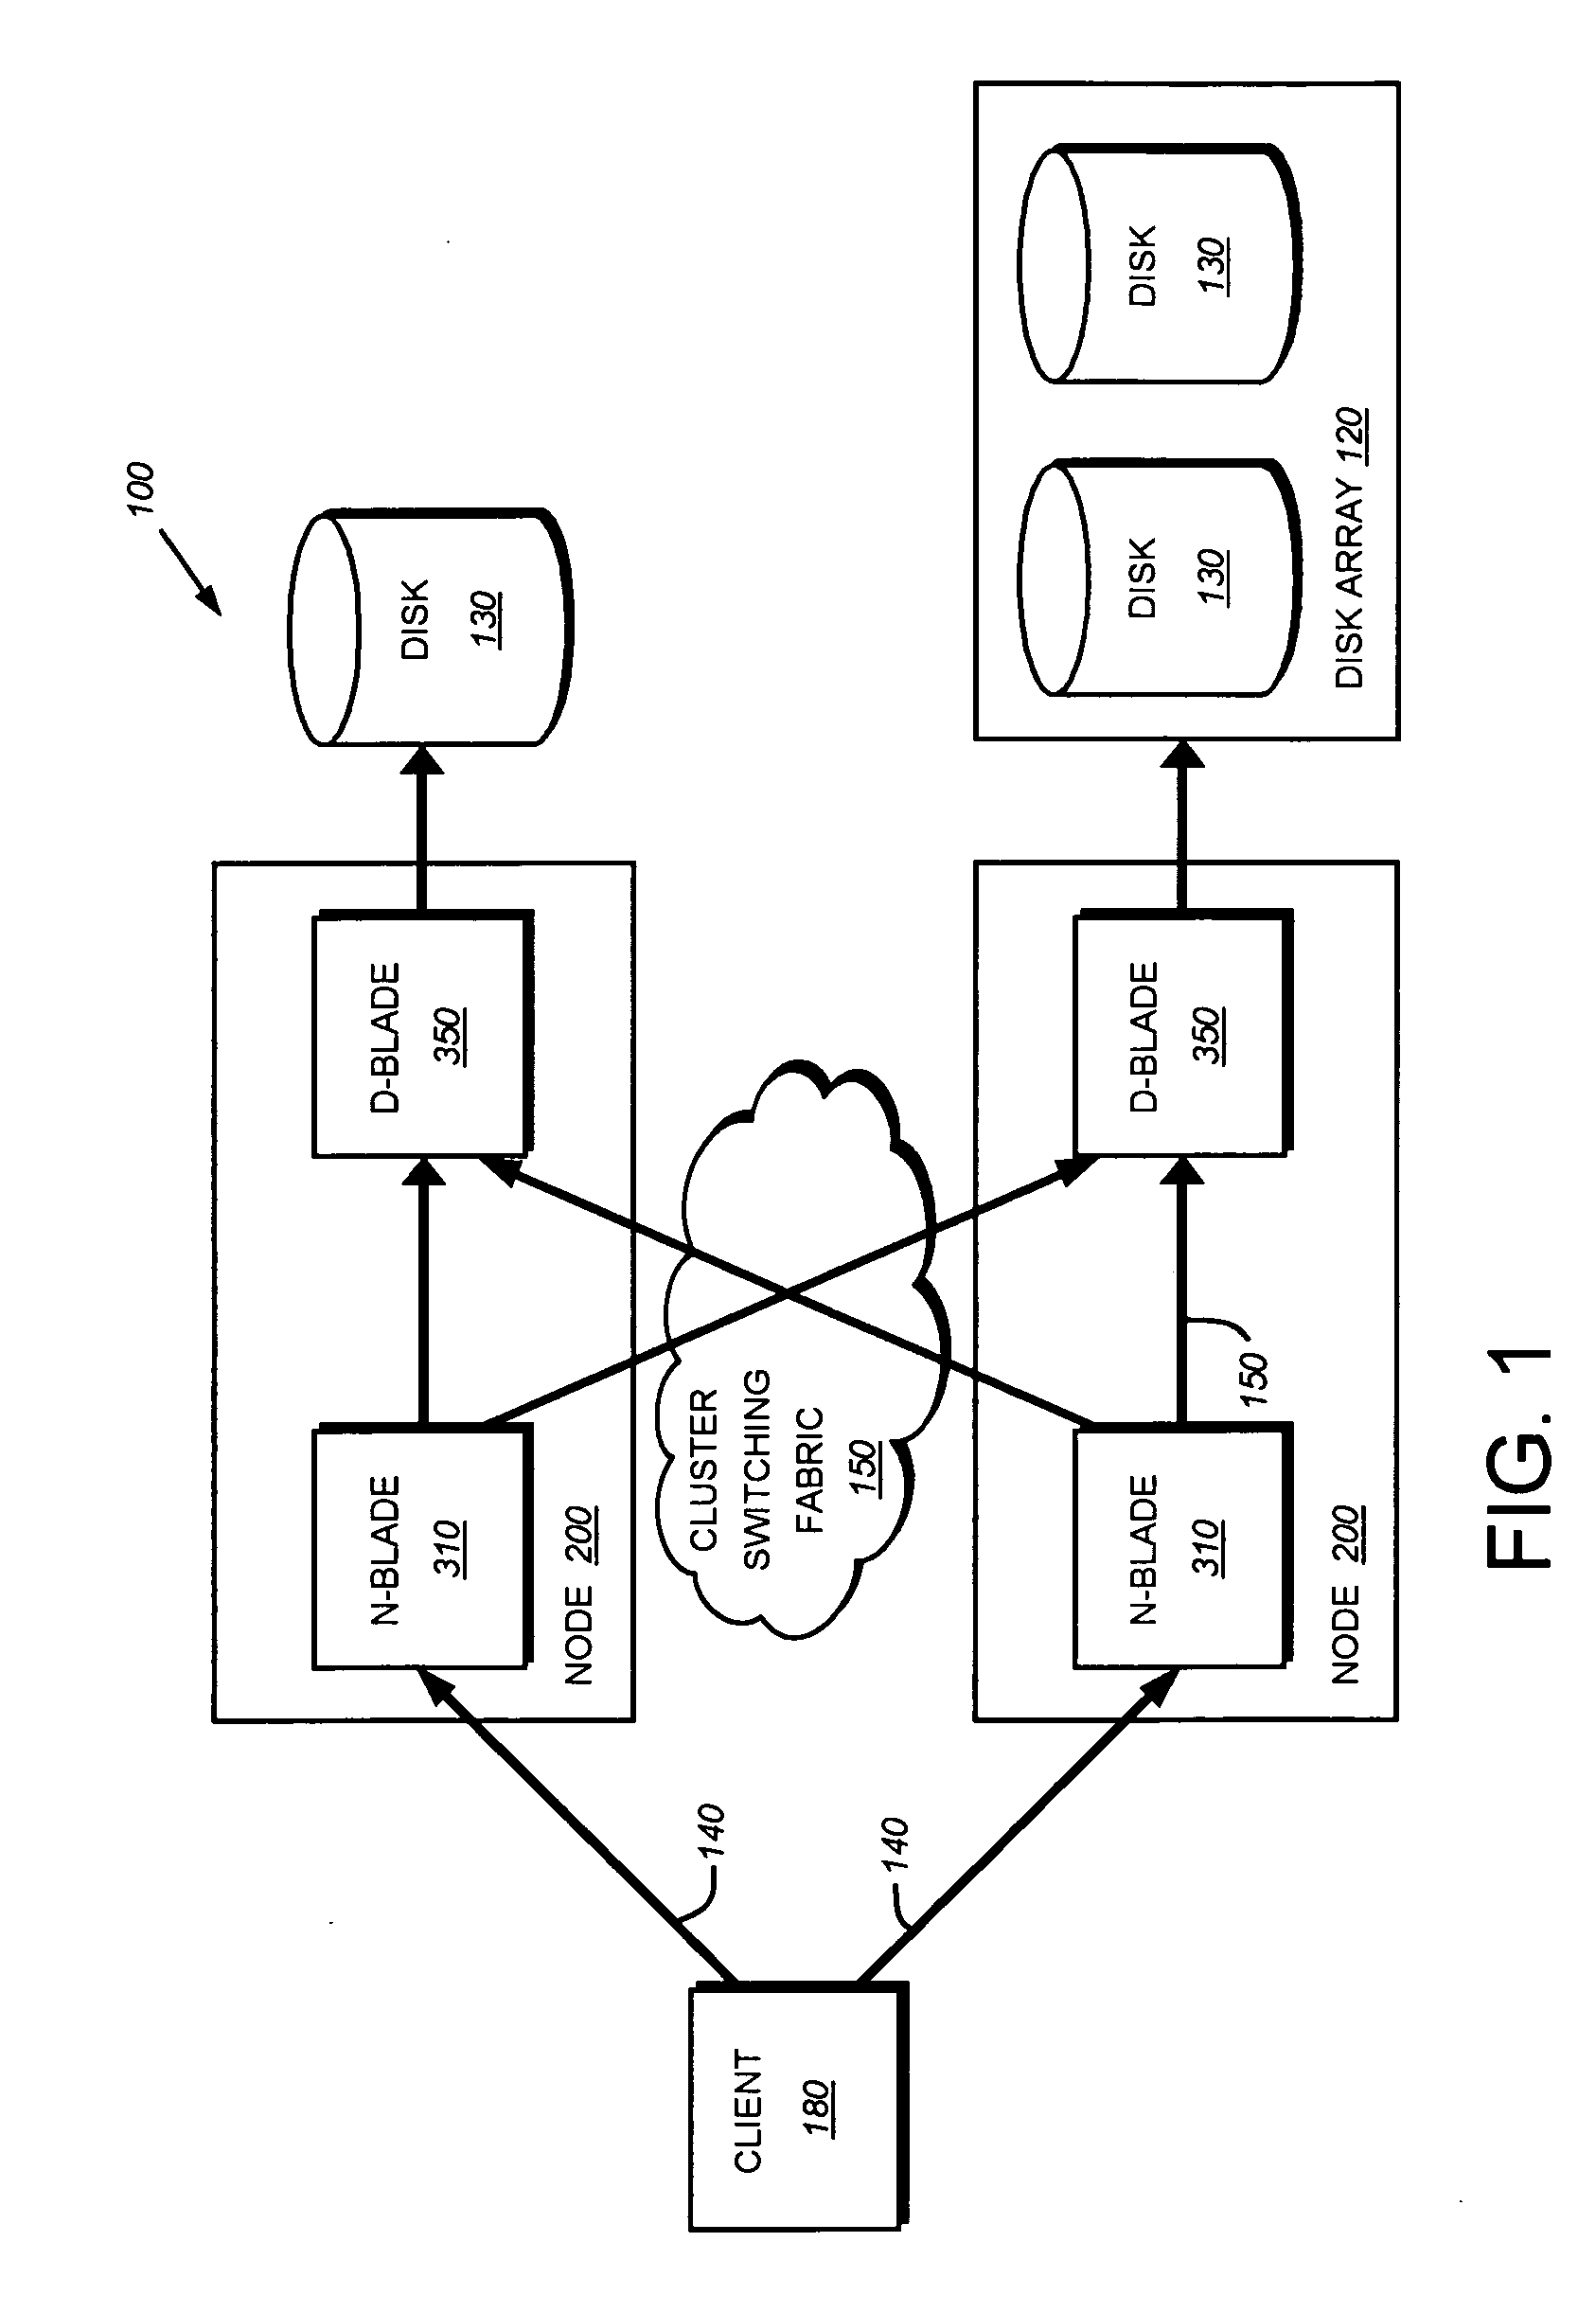 System and method for multi-tiered meta-data caching and distribution in a clustered computer environment